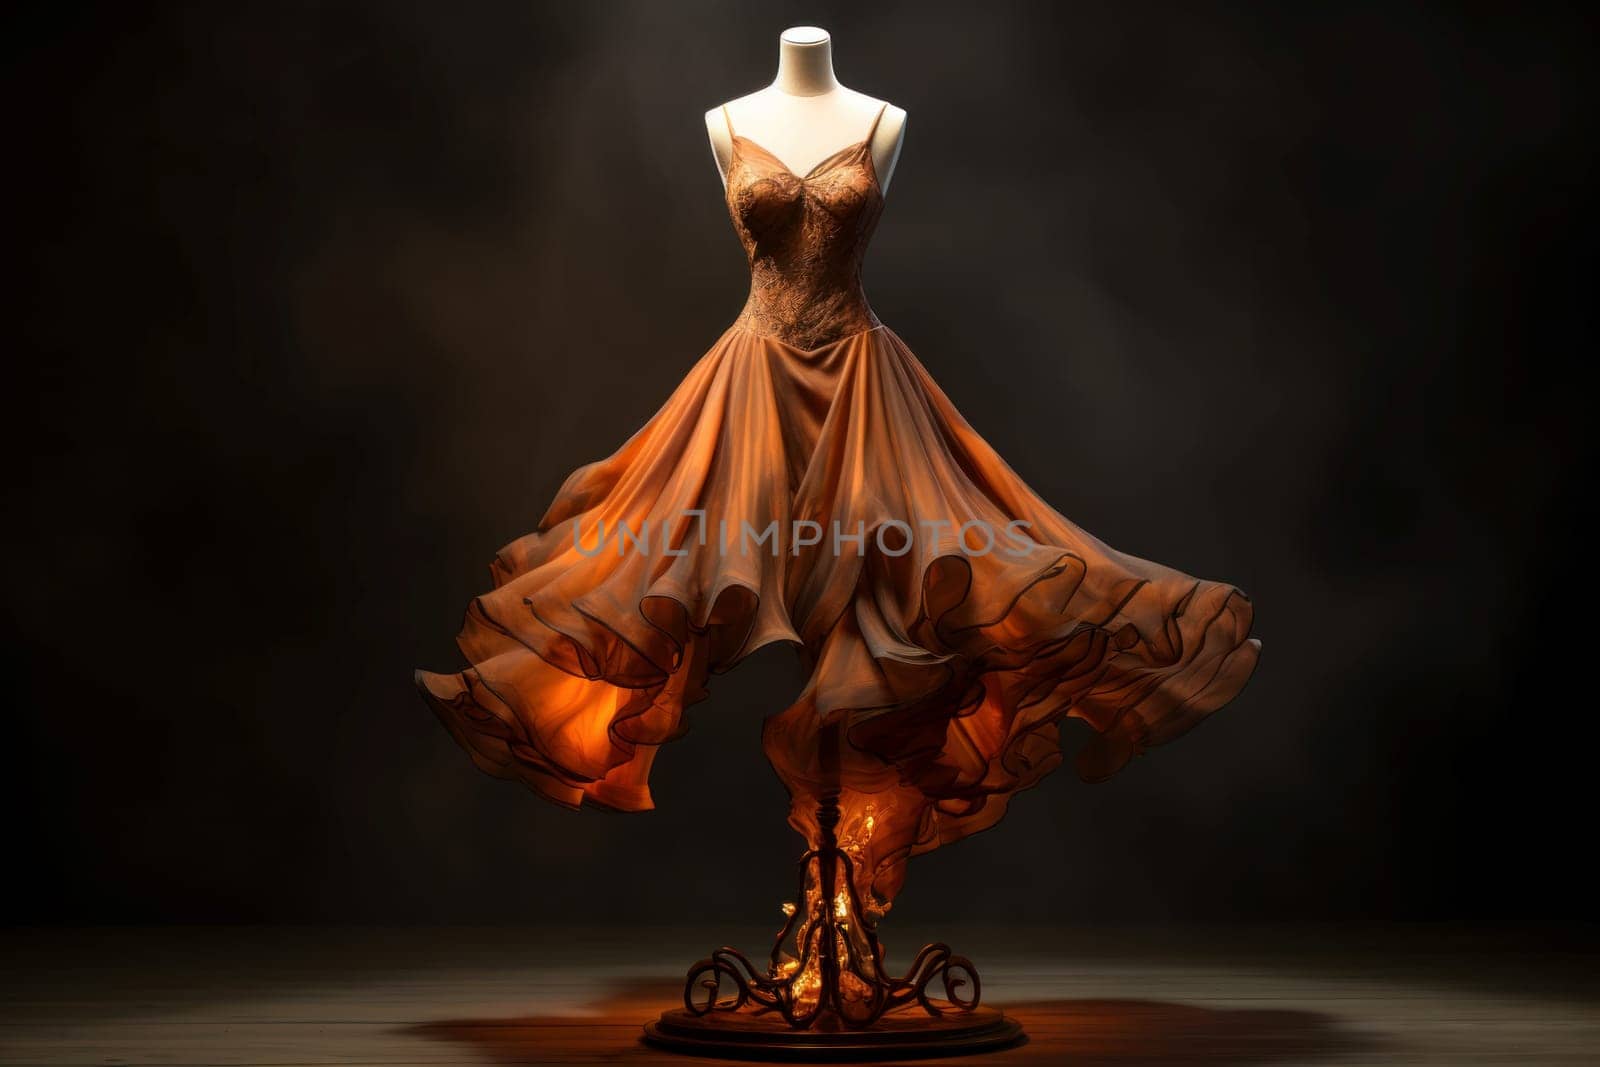 Stunning shot of a flowing dress on a mannequin, capturing the essence of motion on a dark backdrop